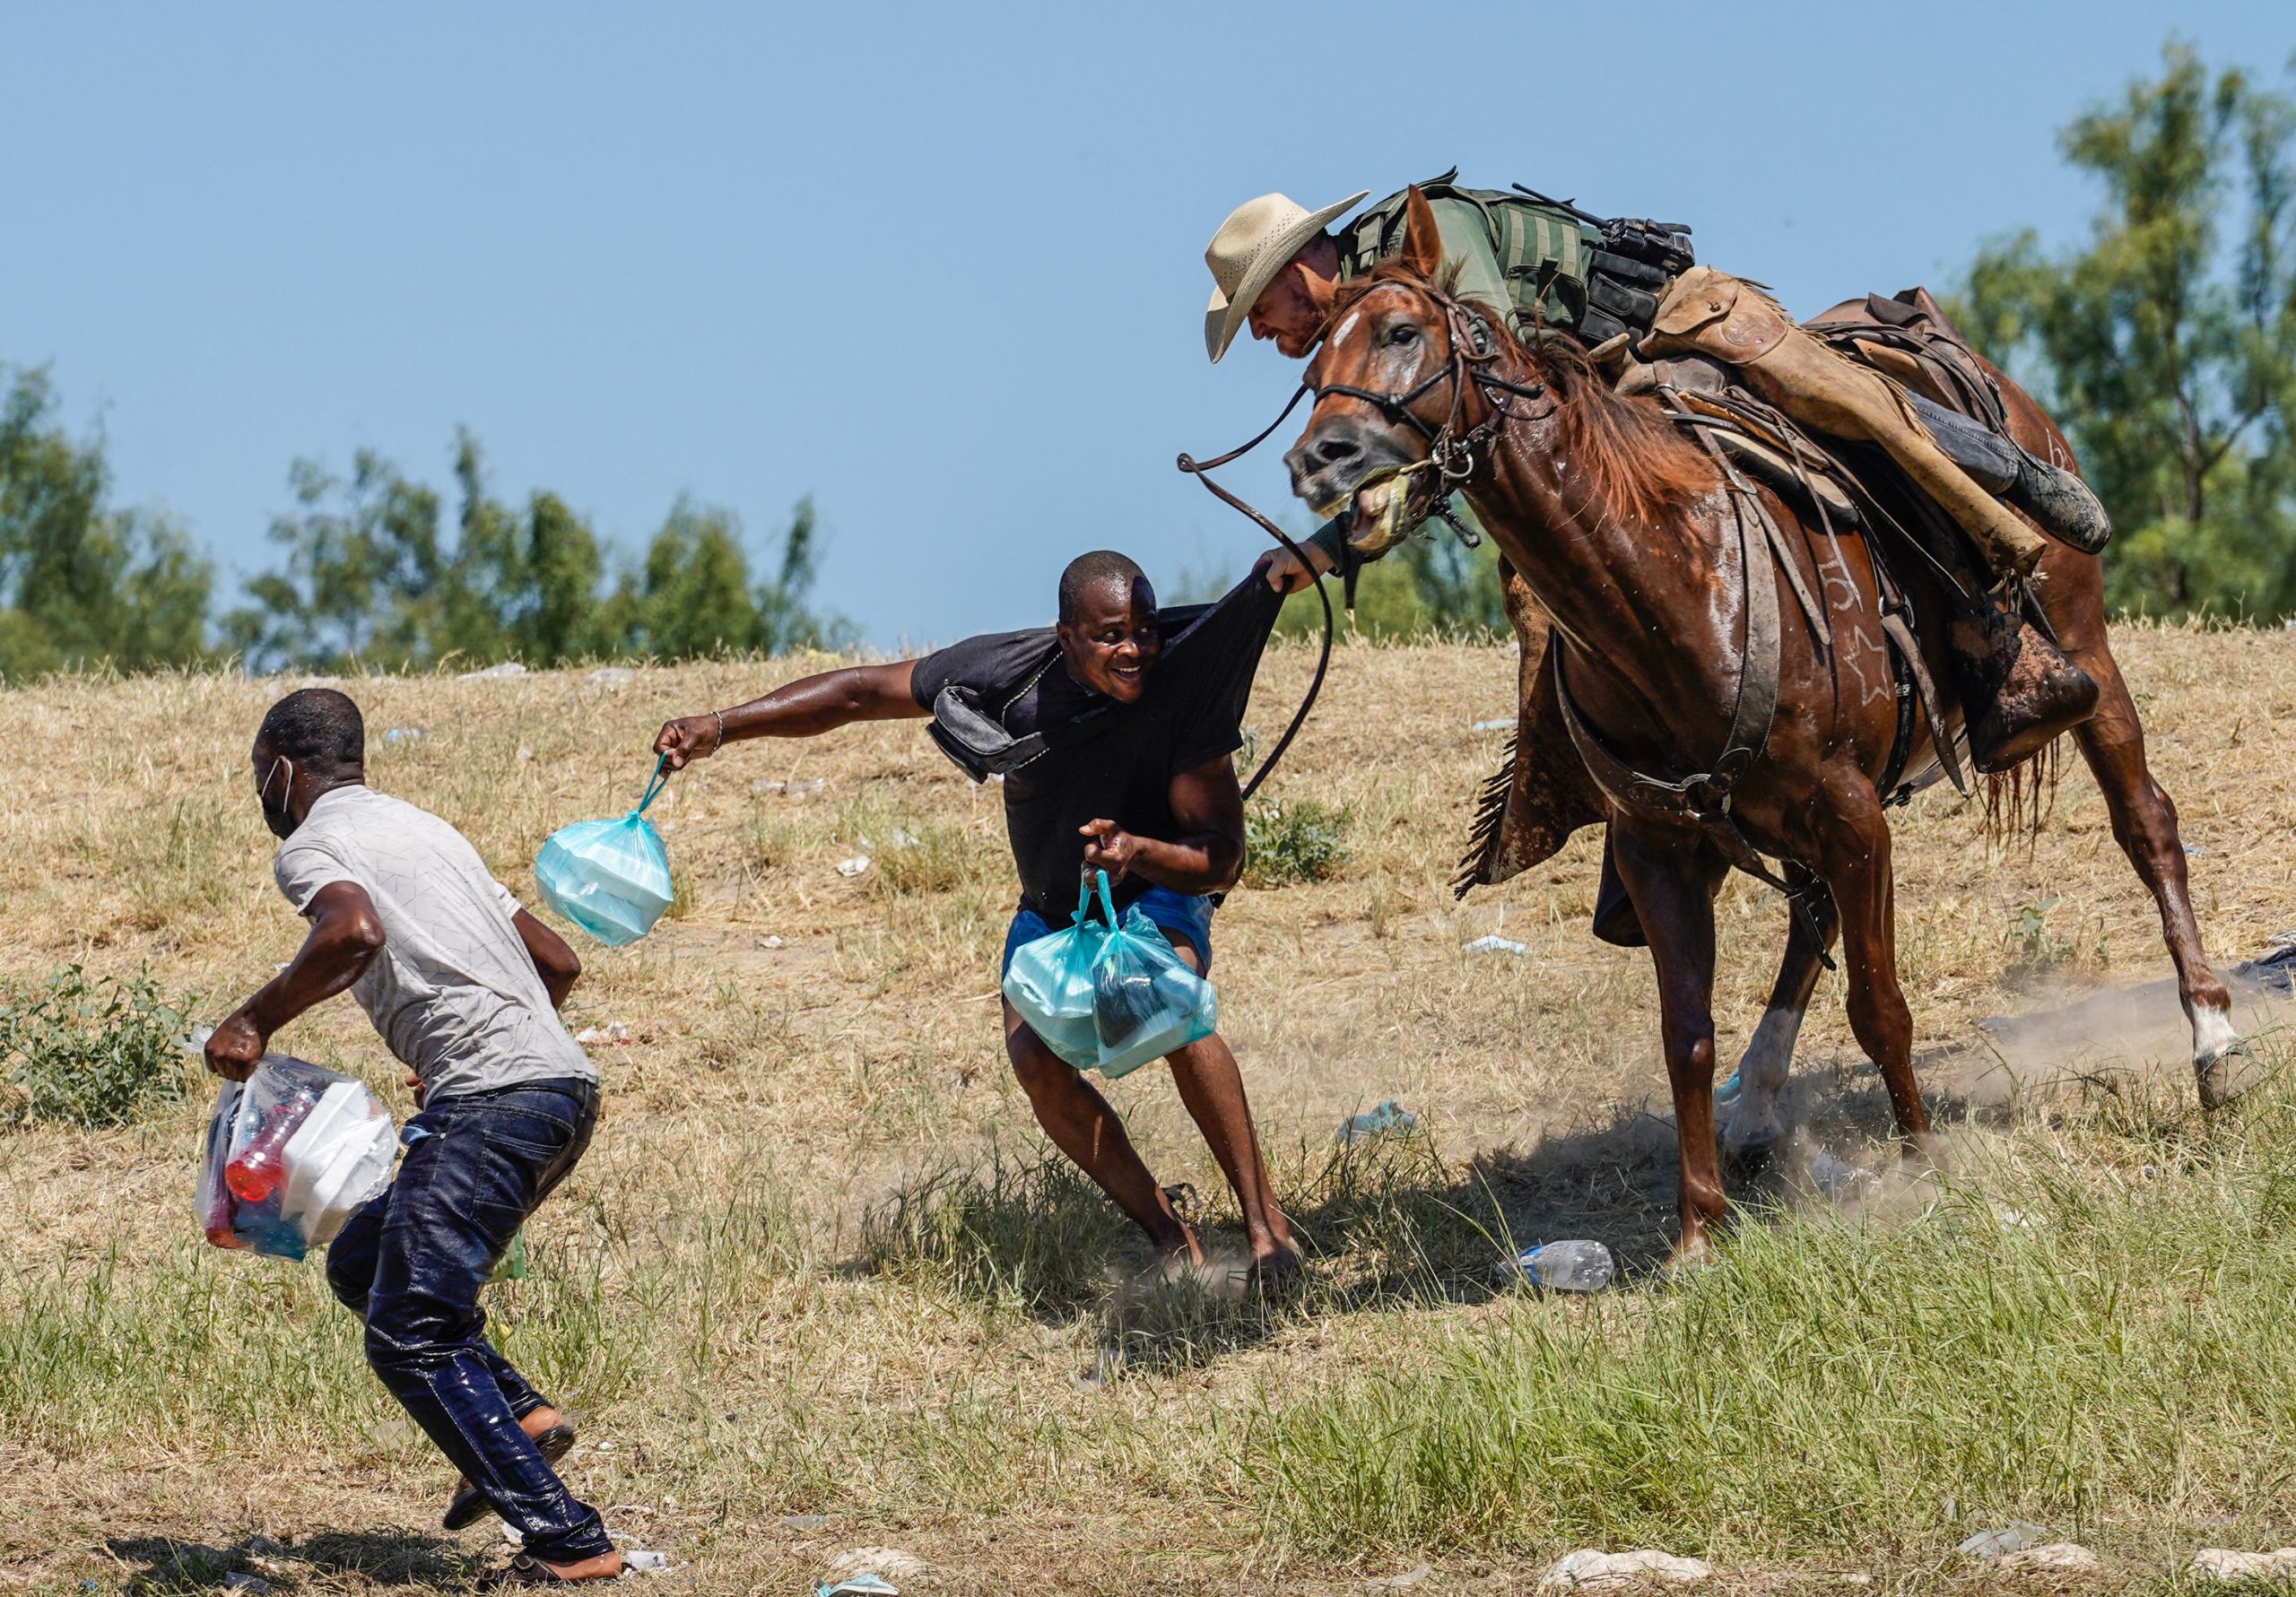 A United States Border Patrol agent on horseback tries to stop a Haitian migrant from entering an encampment on the banks of the Rio Grande near the Acuna Del Rio International Bridge in Del Rio, Texas on September 19, 2021. (Photo by PAUL RATJE / AFP) (Photo by PAUL RATJE/AFP via Getty Images